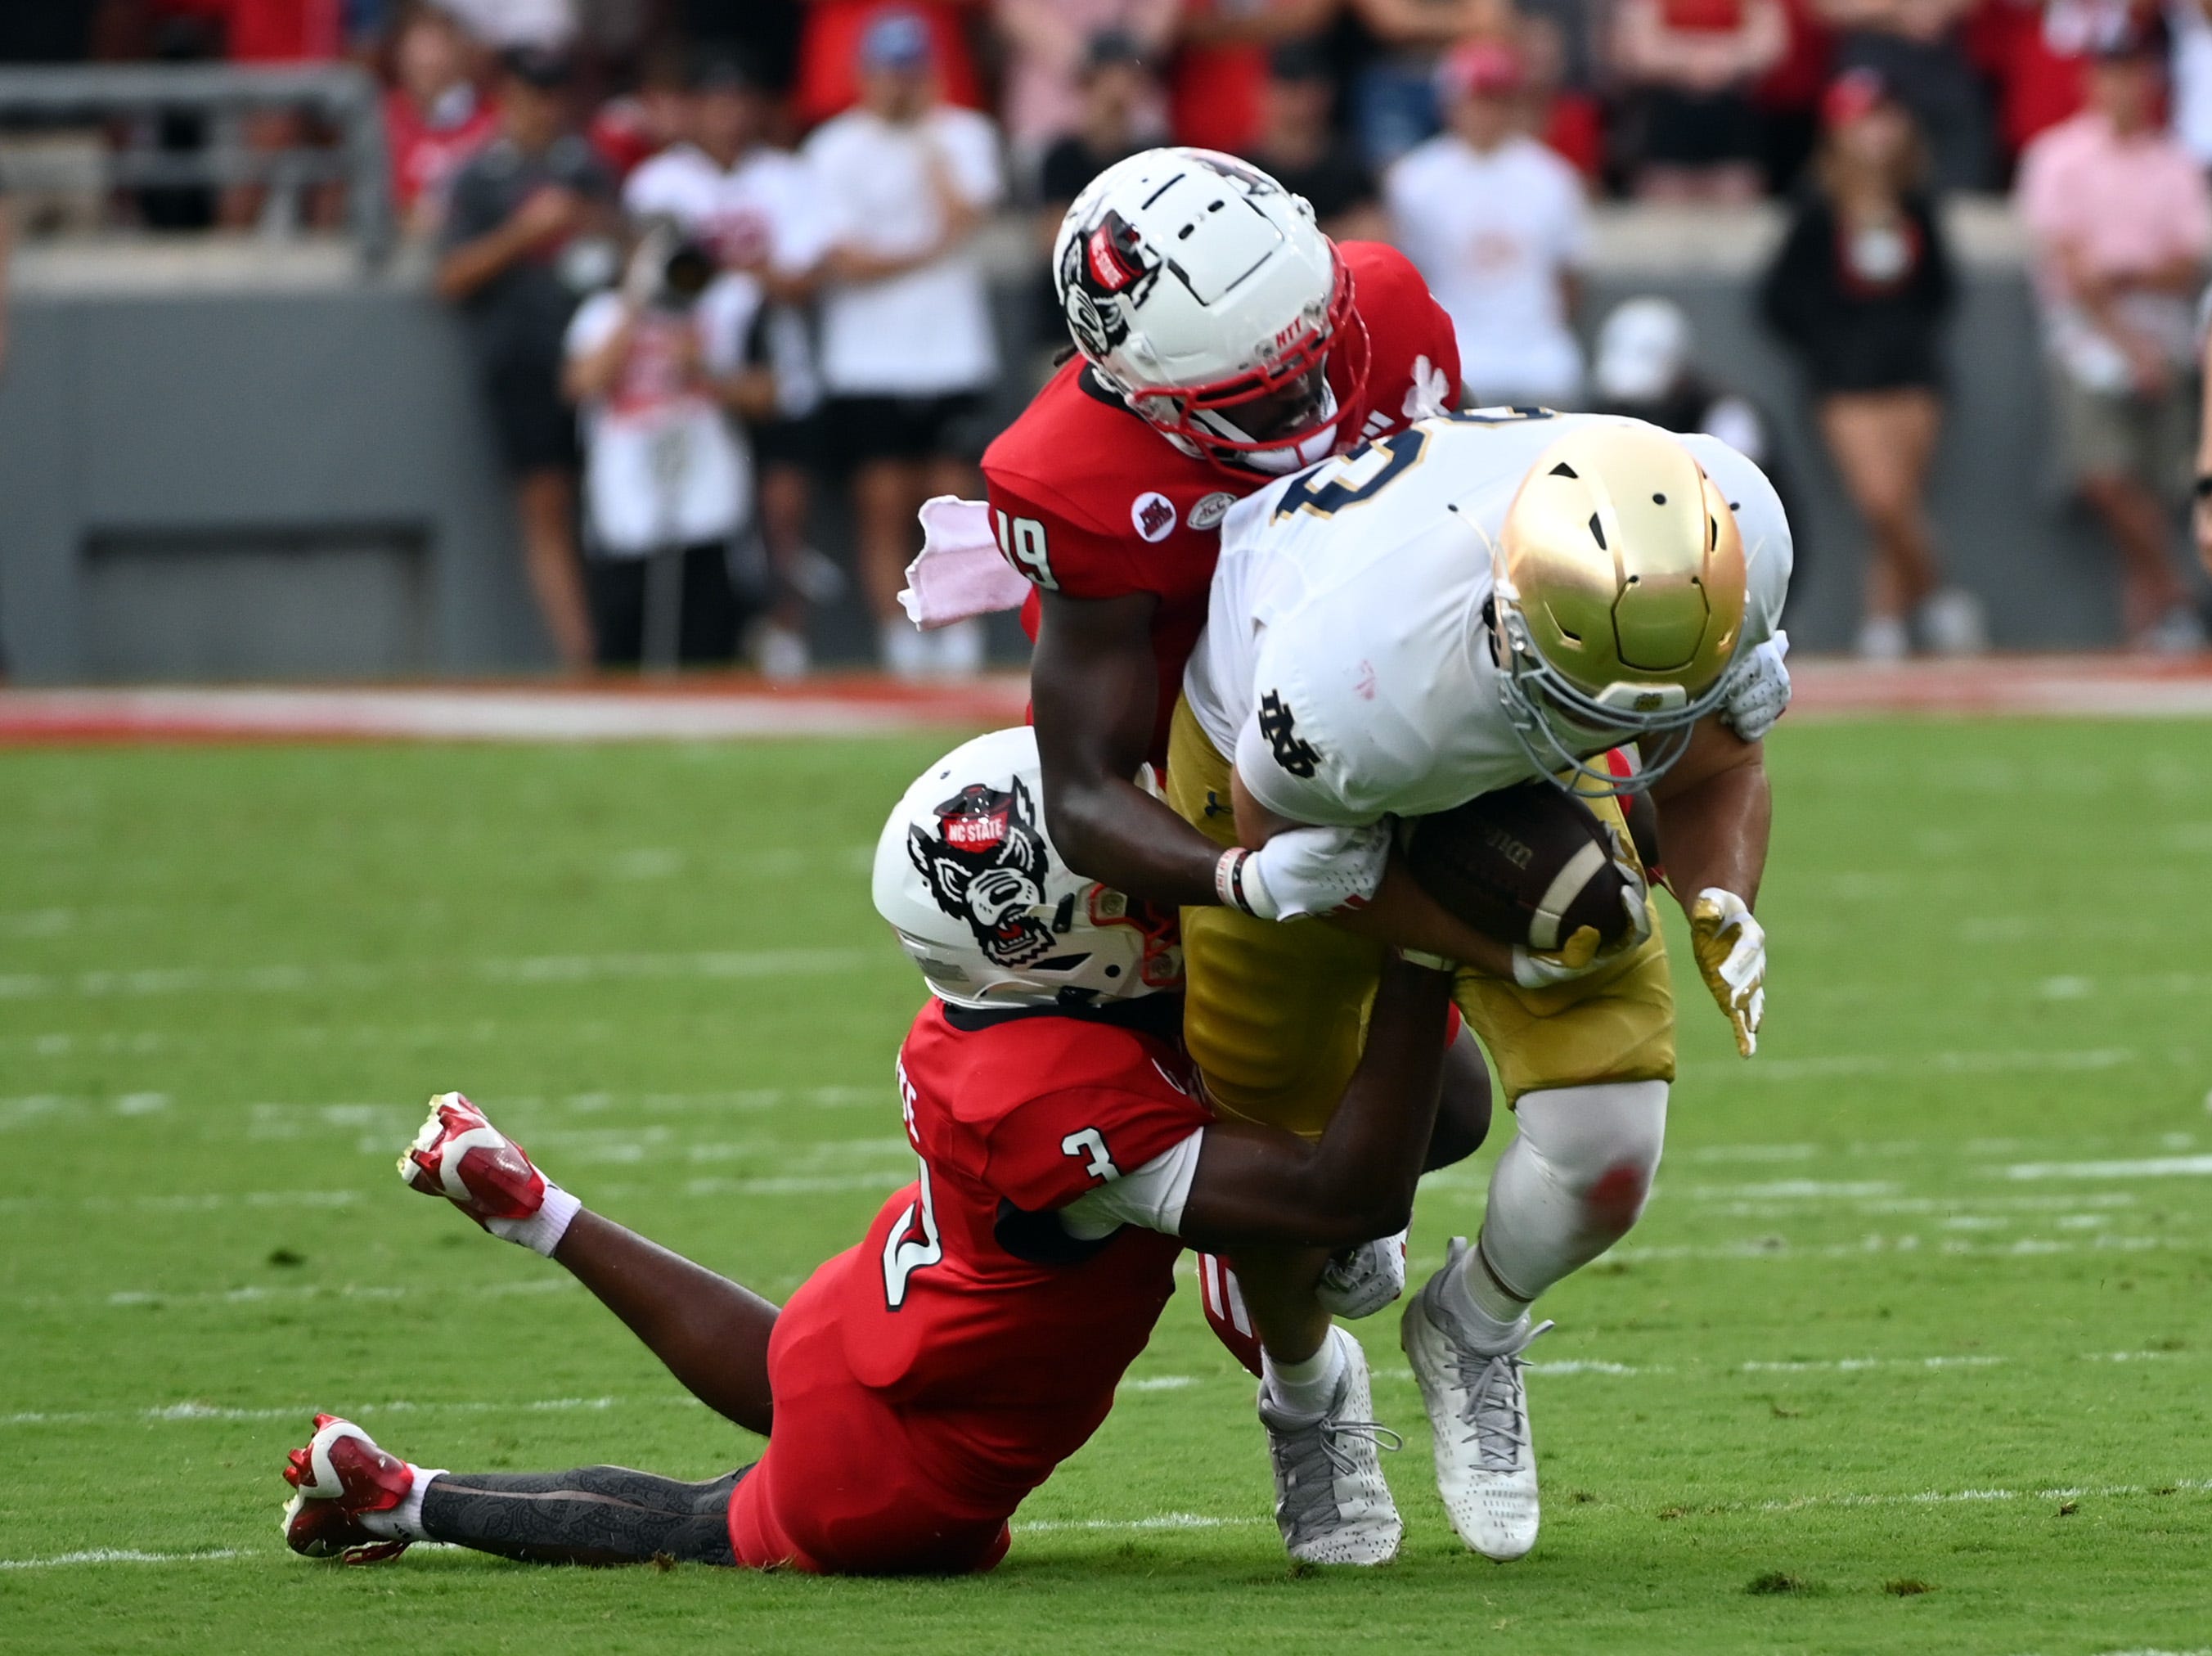 Sep 9, 2023; Raleigh, North Carolina, USA; Notre Dame Fighting Irish tight end Mitchell Evans (88) runs after a catch and is tackled by North Carolina State Wolfpack cornerback Aydan White (3) during the first half at Carter-Finley Stadium. Mandatory Credit: Rob Kinnan-USA TODAY Sports